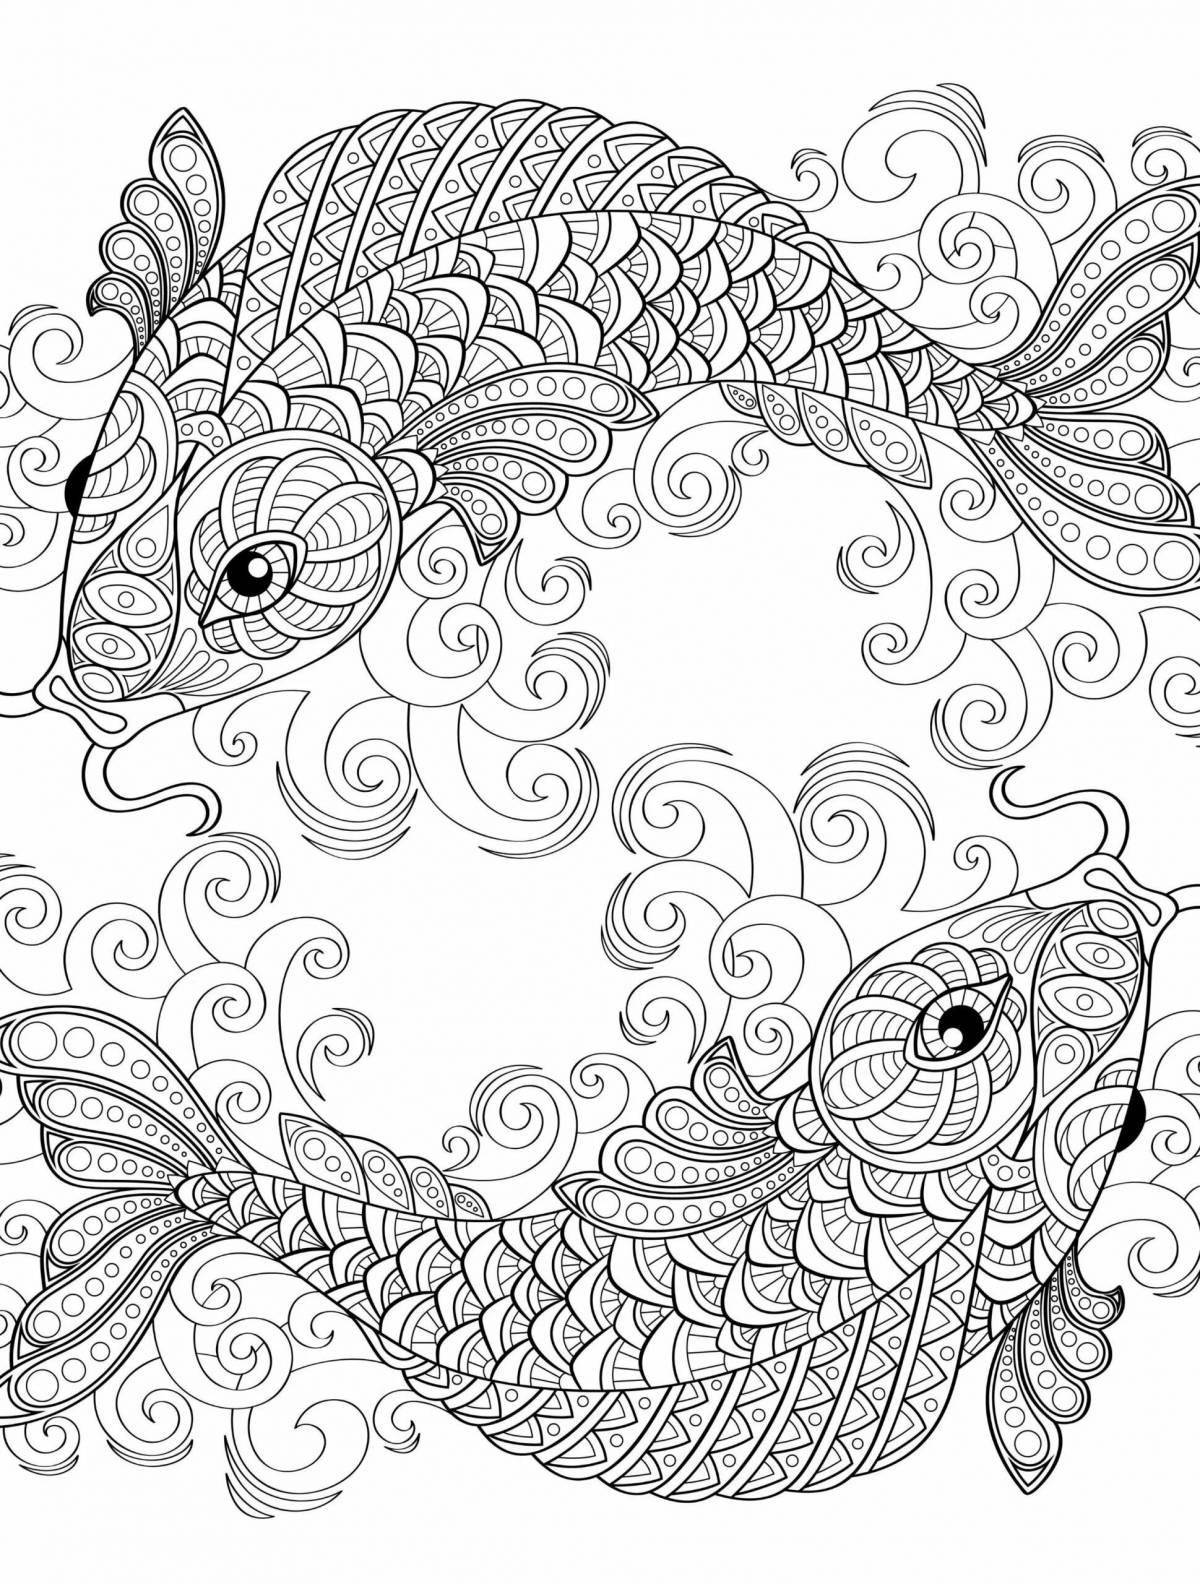 Calming coloring page relax living patterns